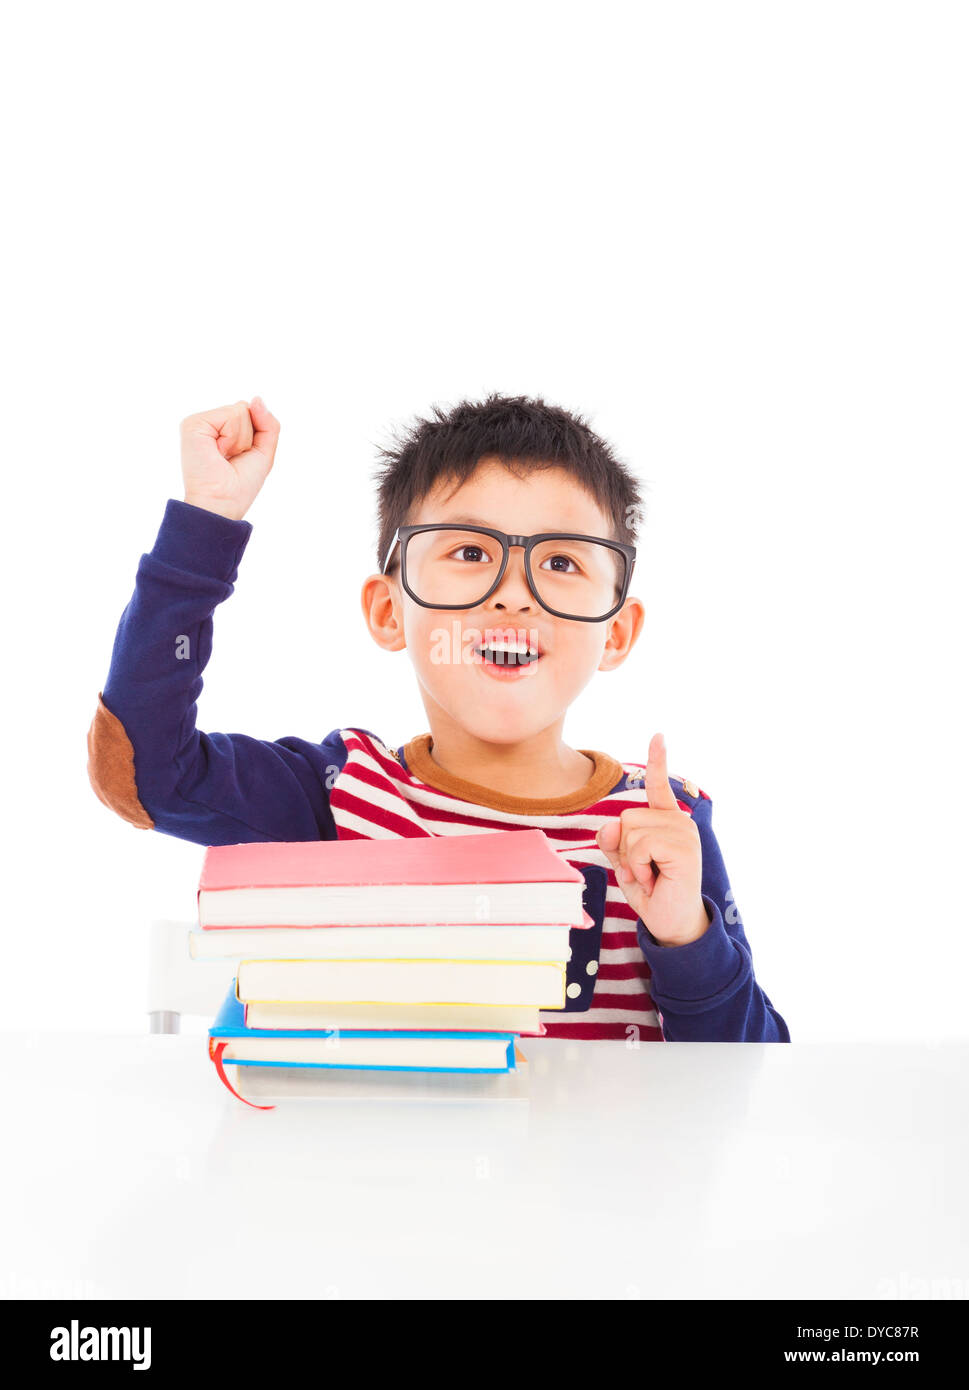 little boy think out a good ideas and raise hand Stock Photo